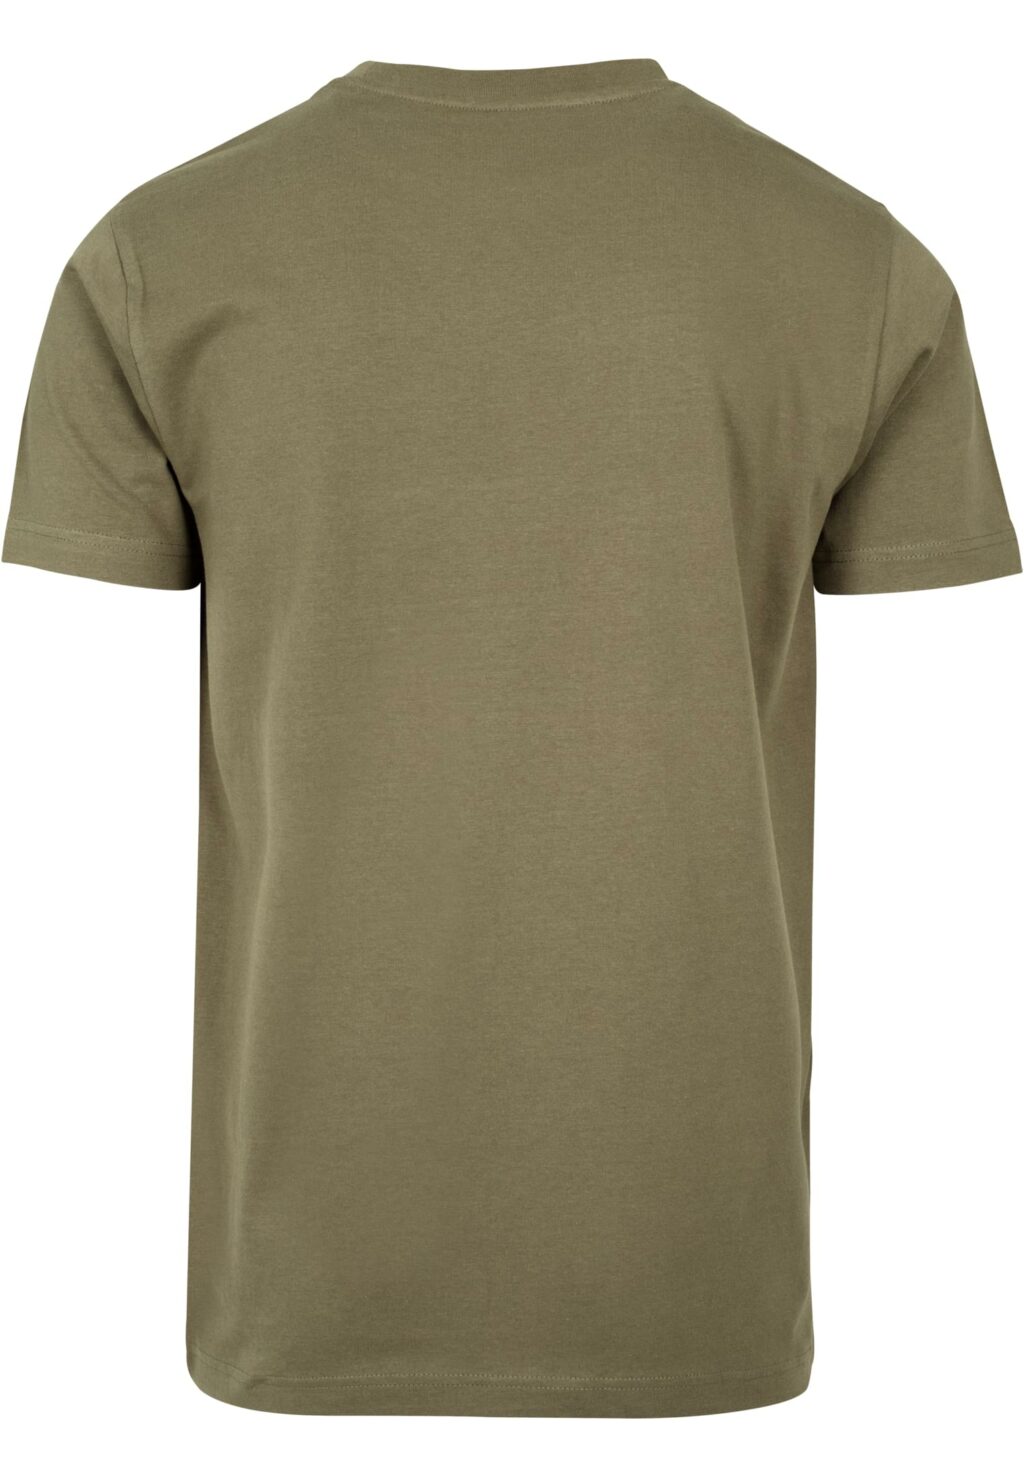 Easy Sign Tee olive MT1485